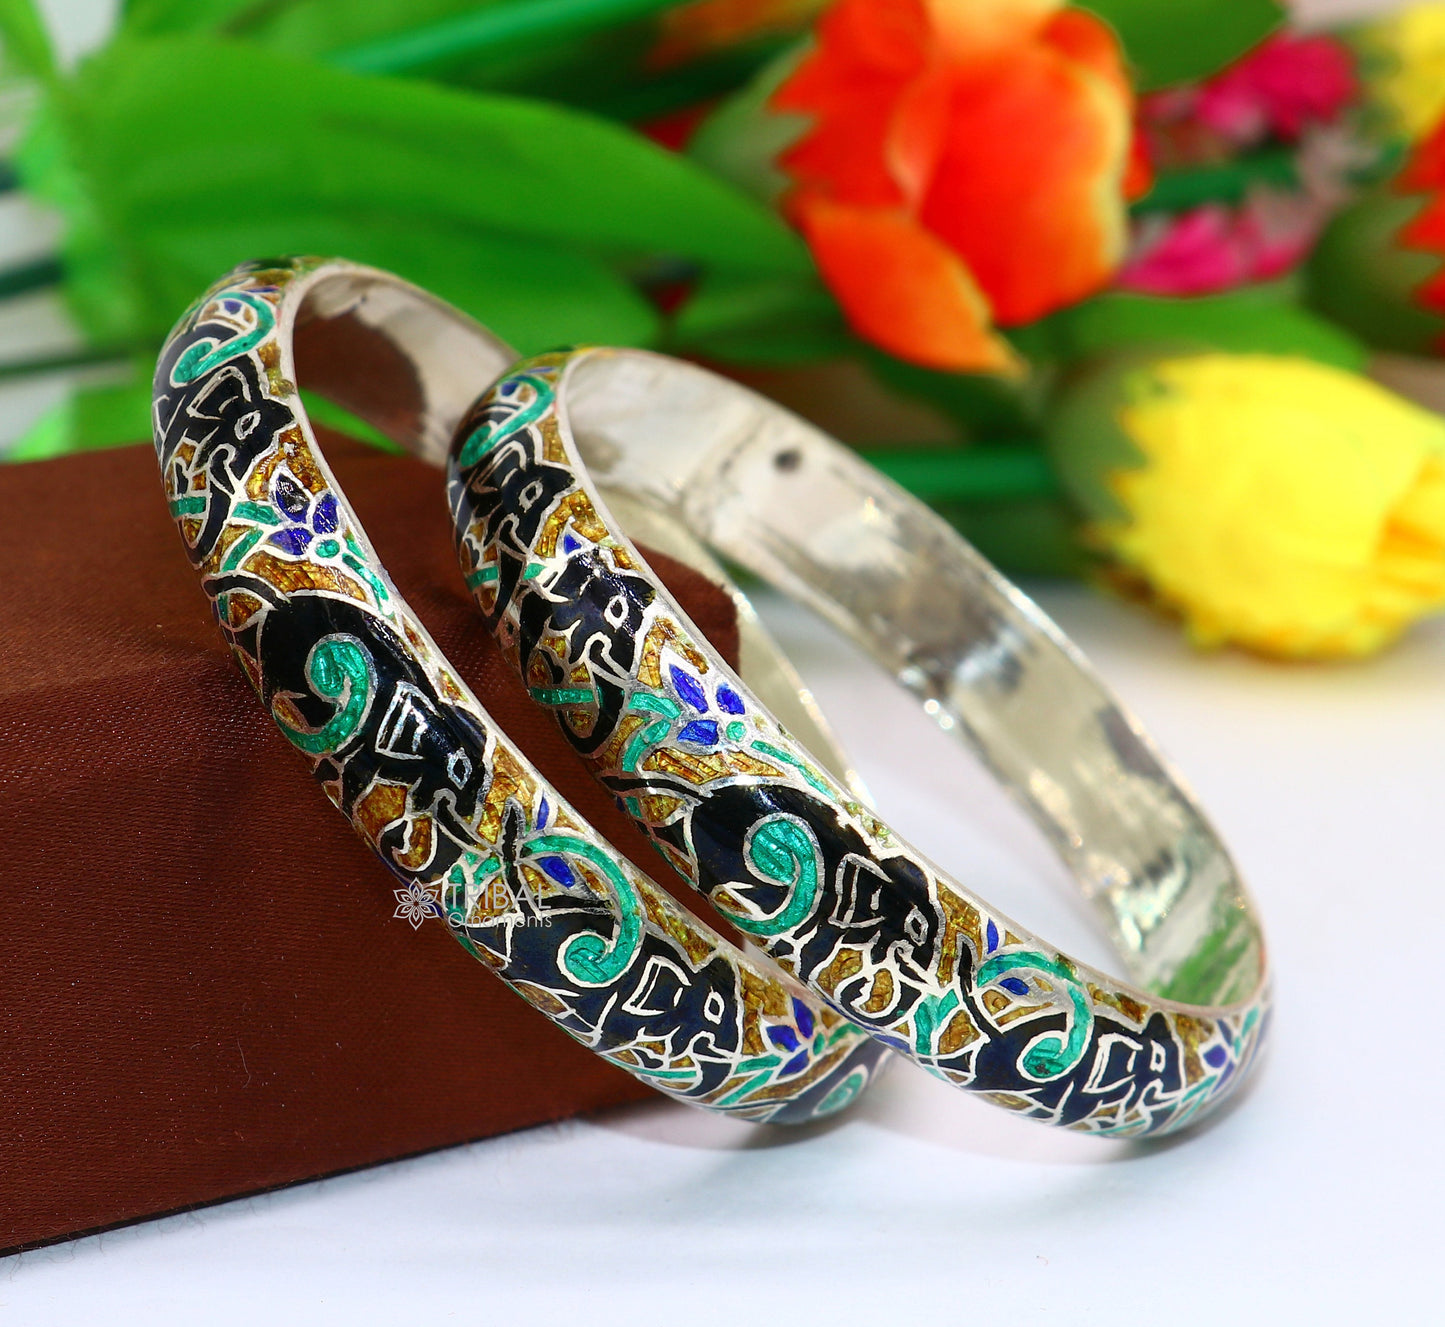 925 Sterling silver handmade amazing meenakari (color enamel )bangle bracelet elephant design Cultral trendy style jewelry from india nba355 - TRIBAL ORNAMENTS